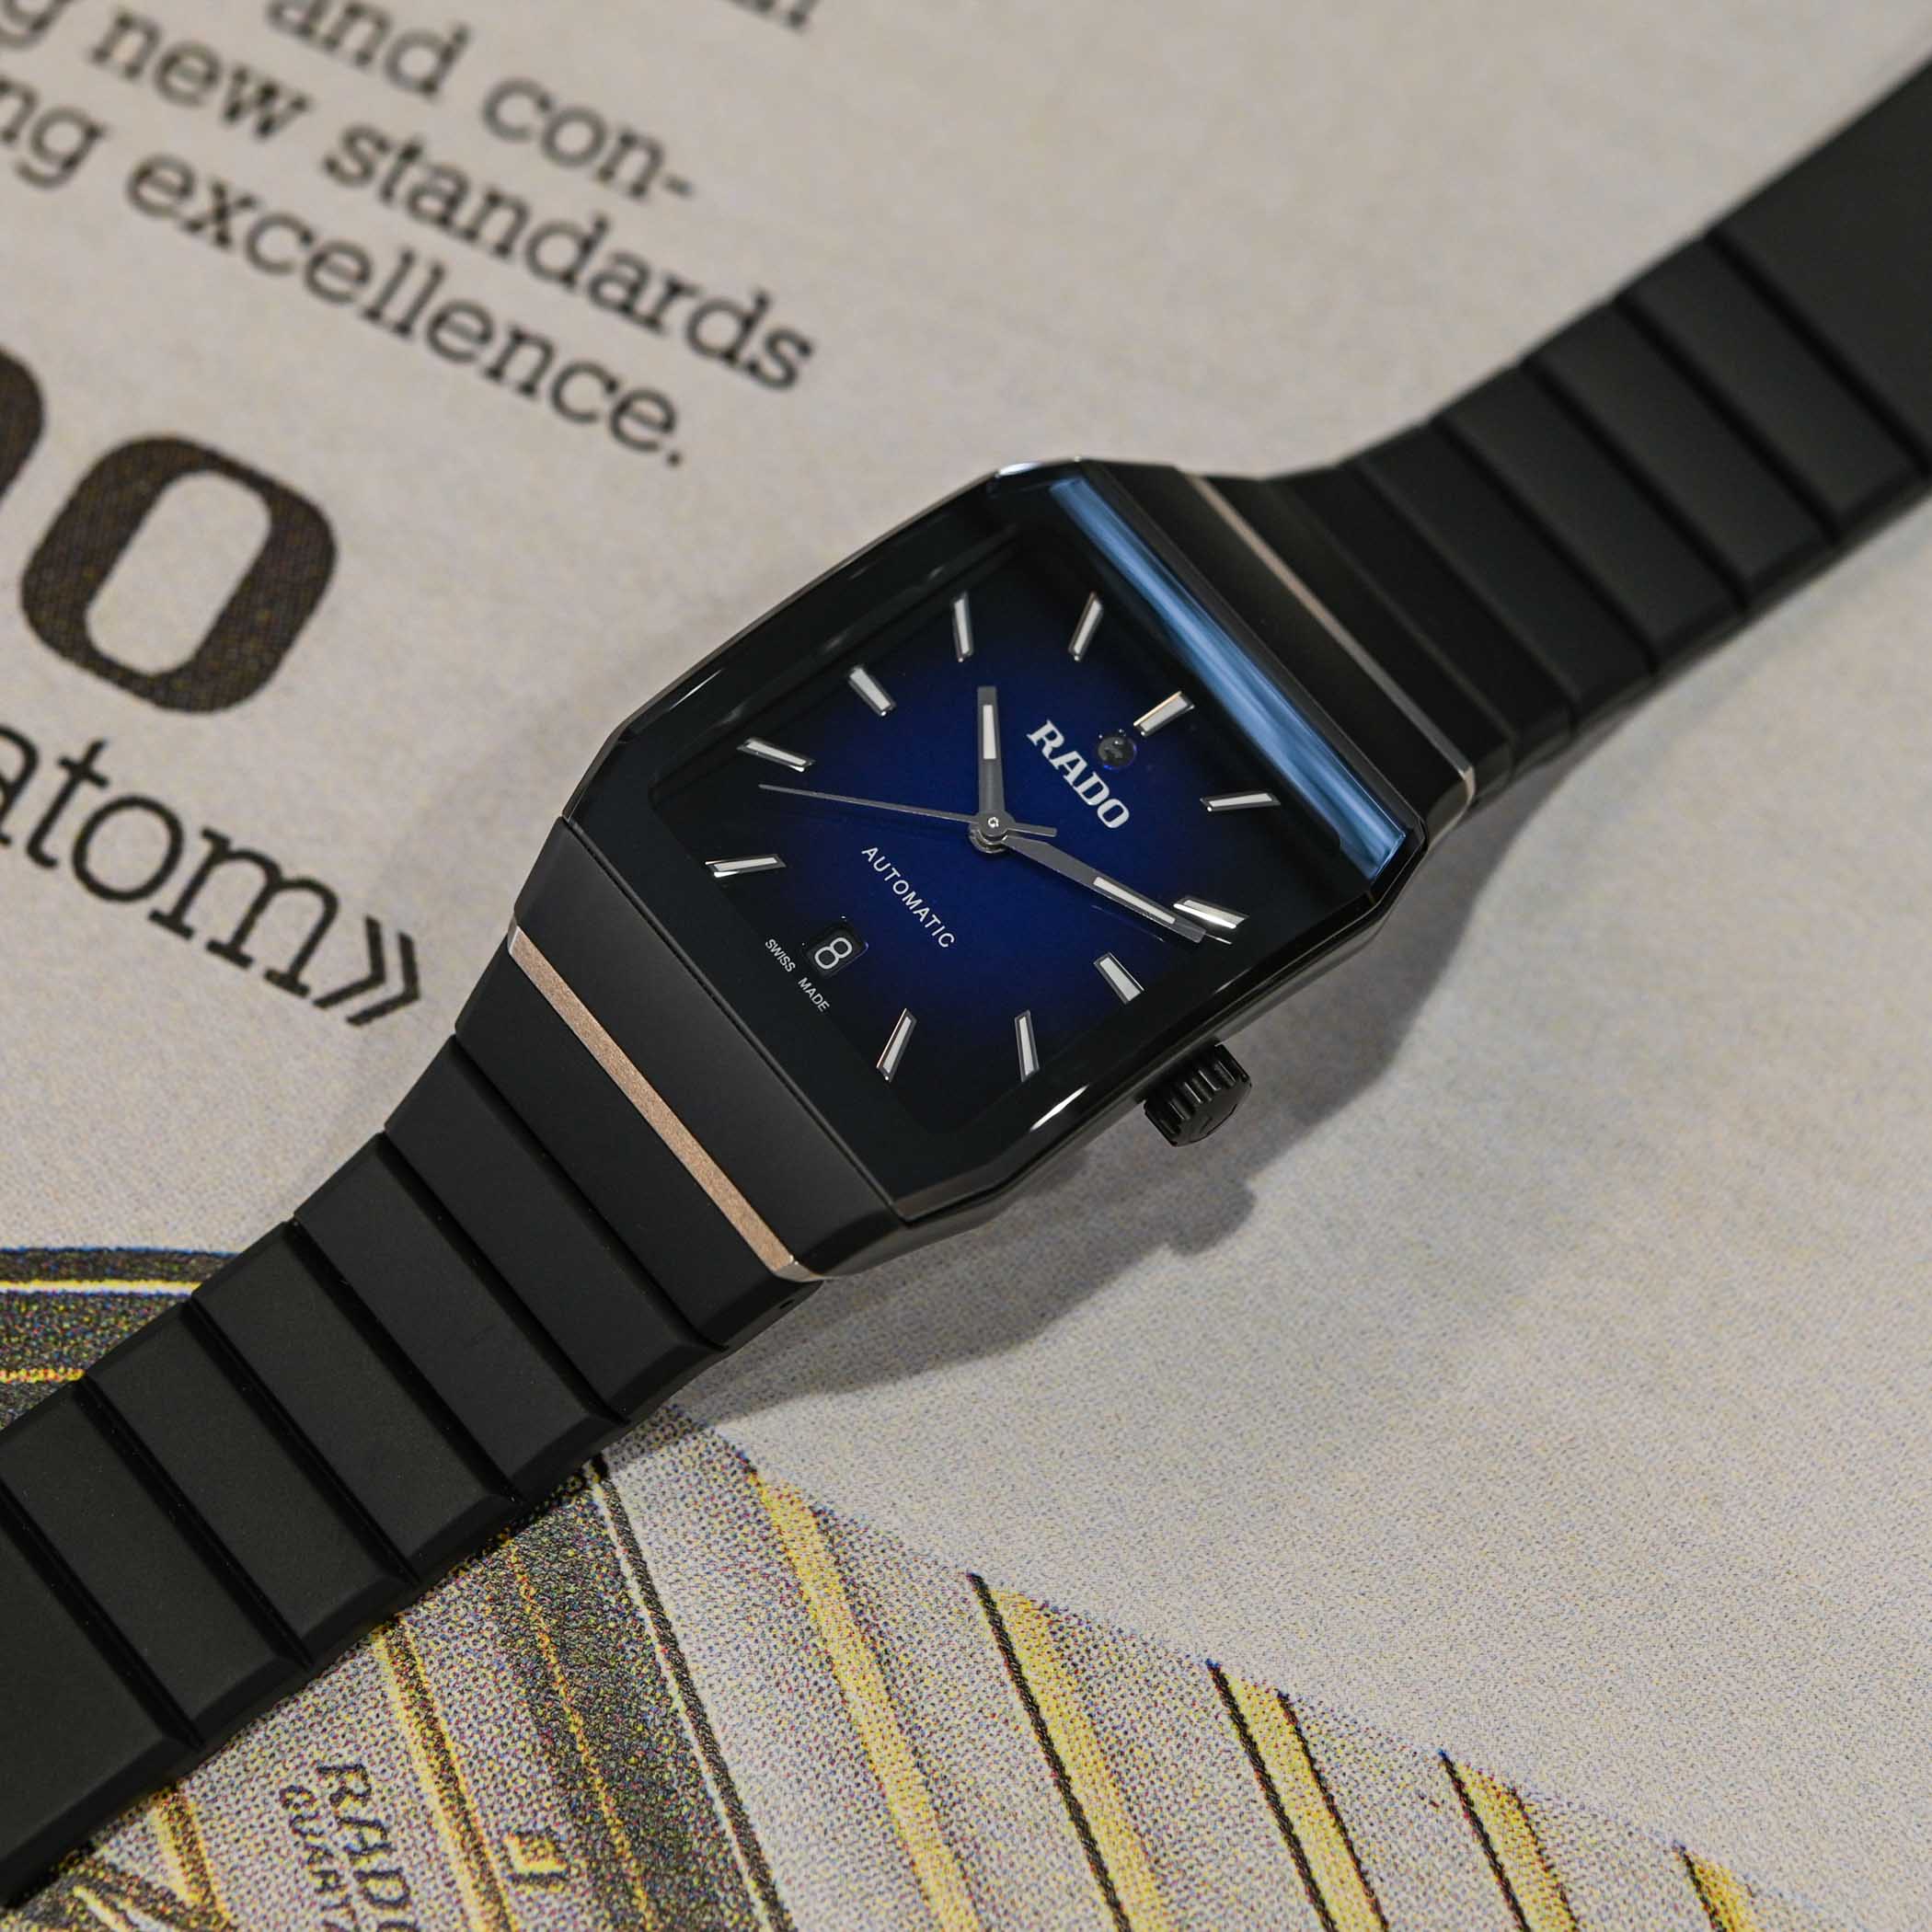 2023-return-of-rado-anatom-collection-vintage-inspired-square-watch-ceramic-hands-on-review-1